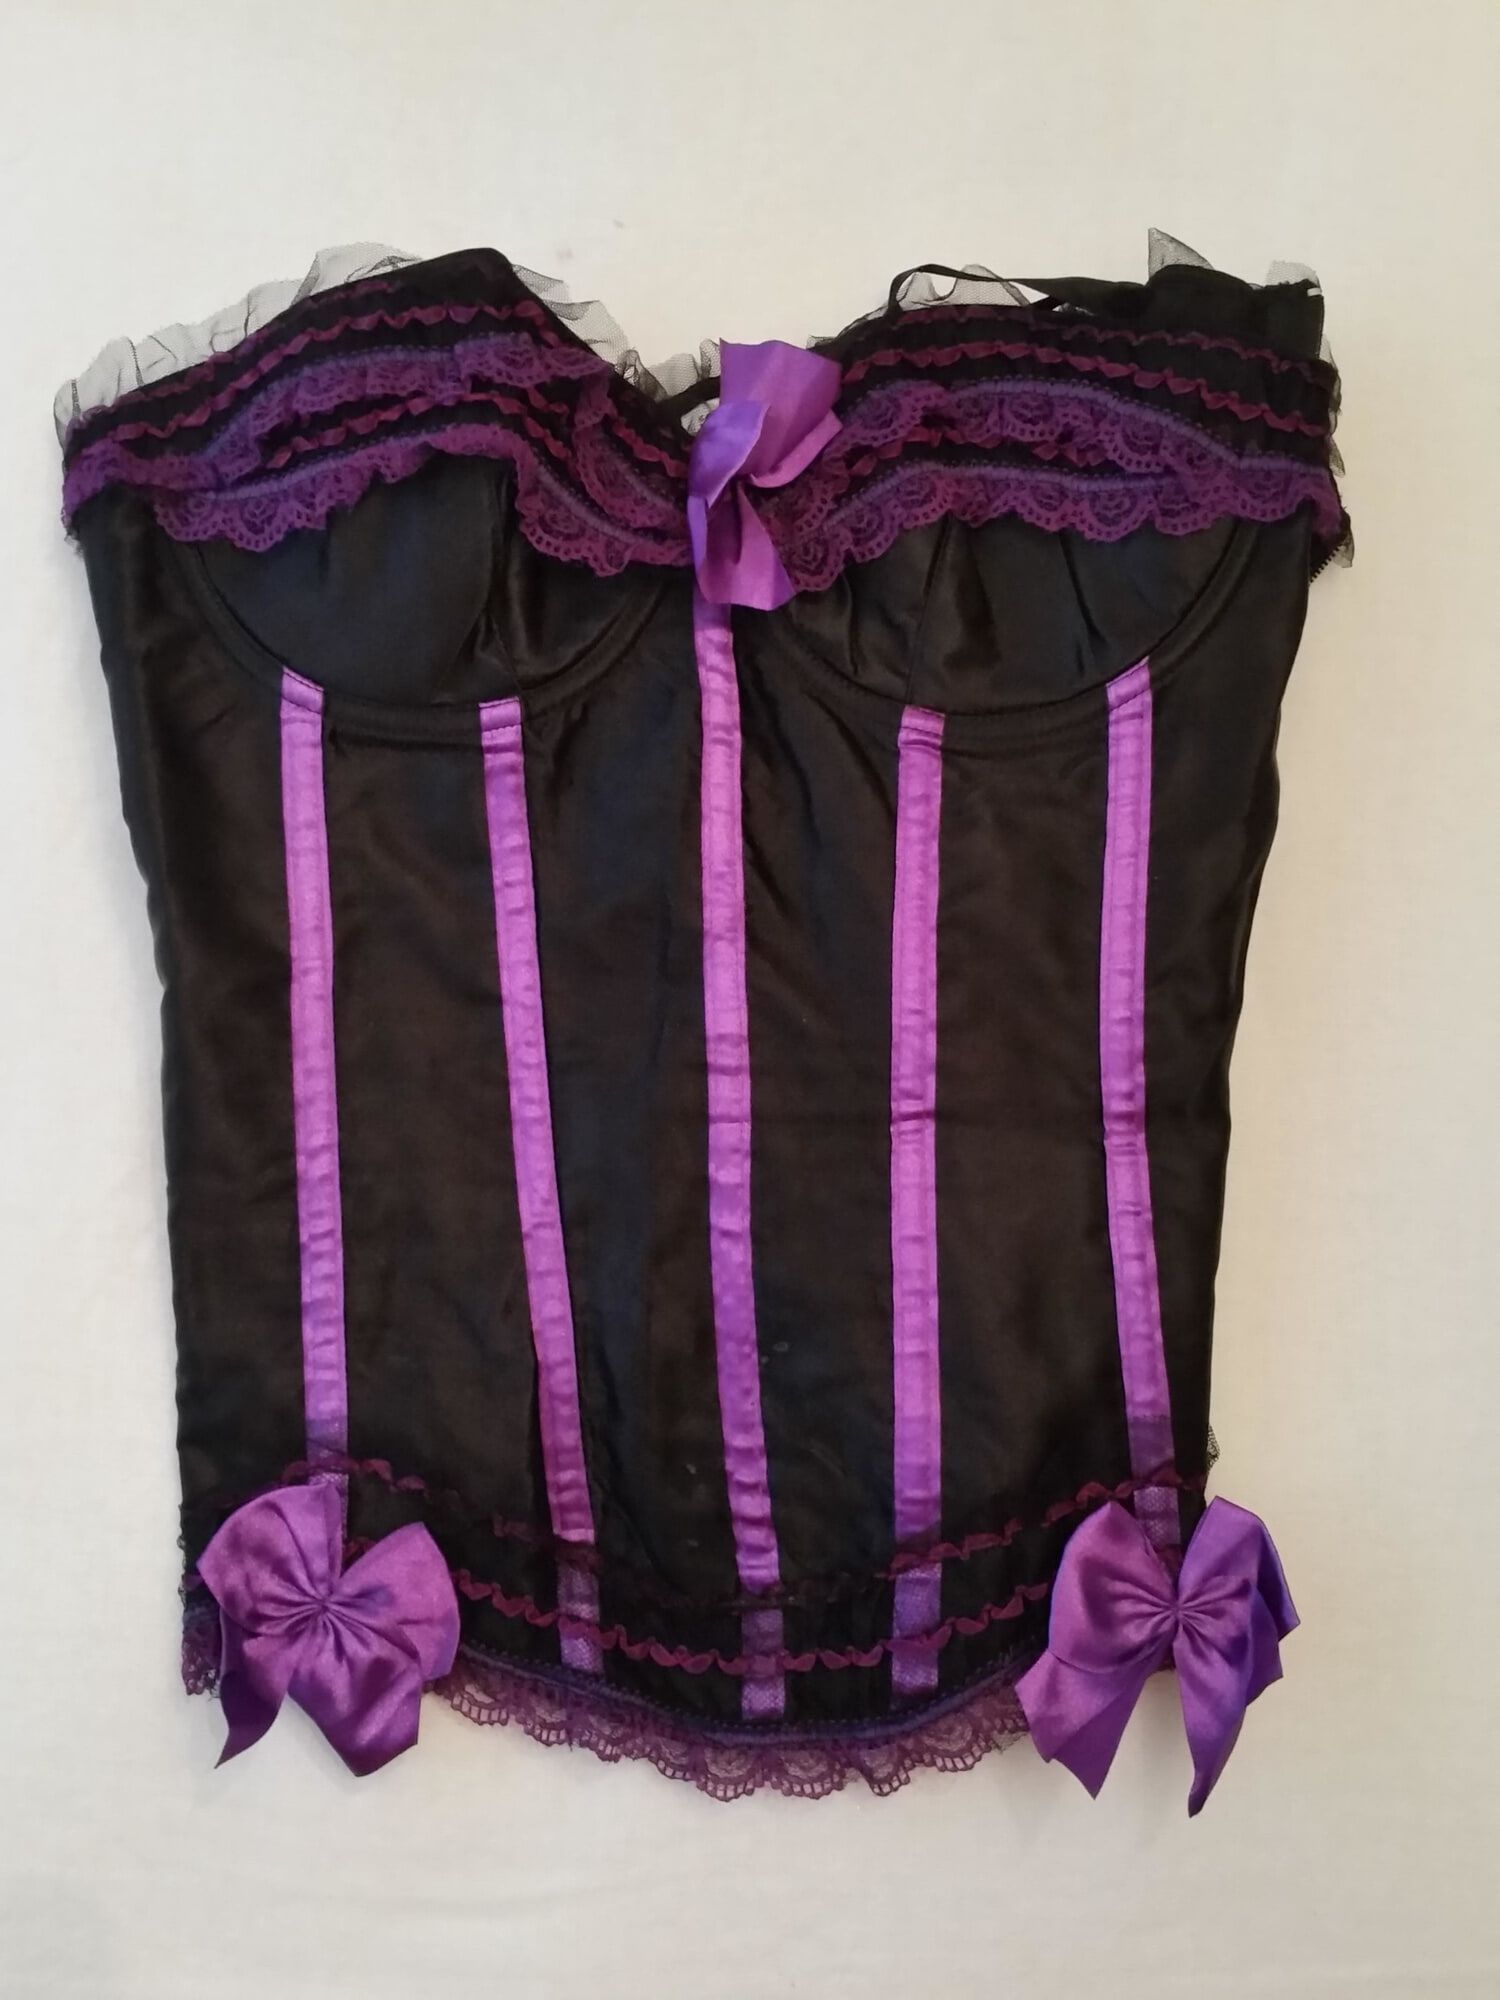 Crosssdressing Collection - Corsets #7